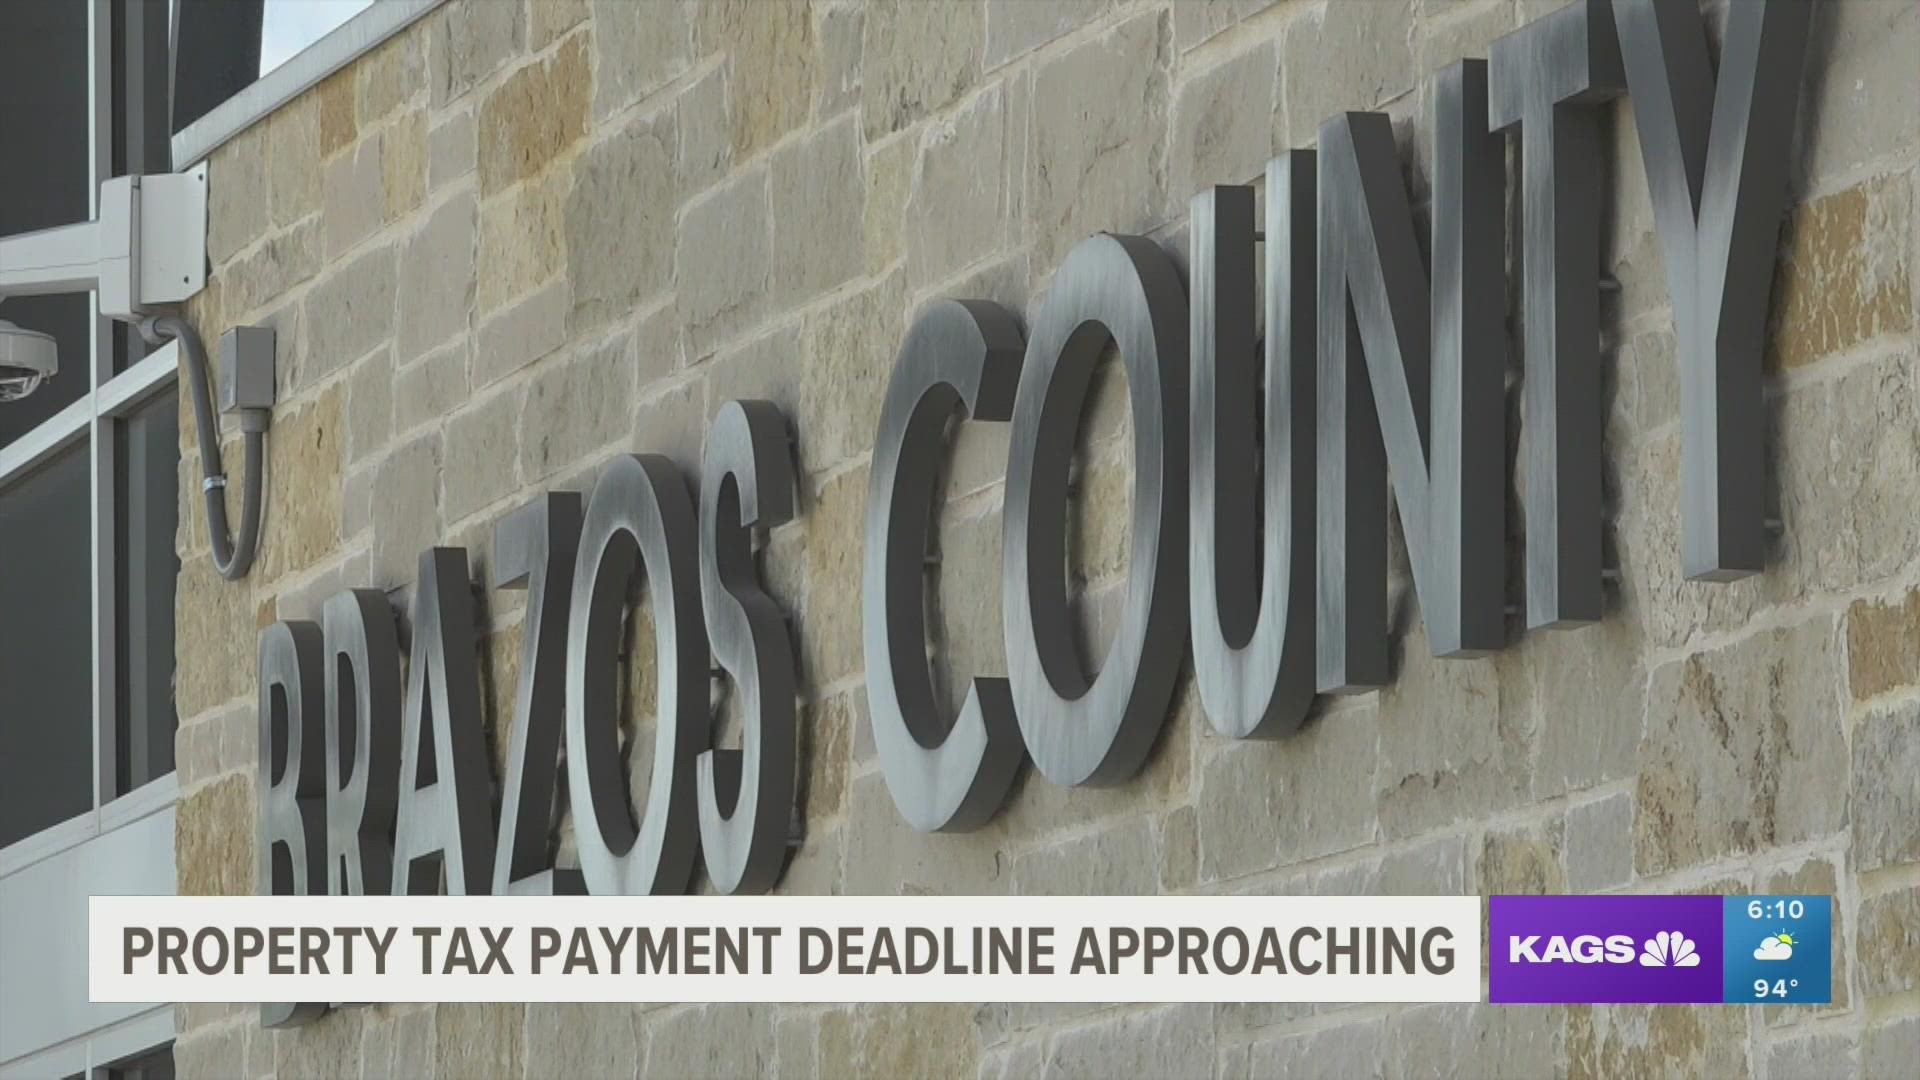 Tax Assessor/Collector for Brazos County said that people have until Thursday, June 30, to make the second installment for their split payment.